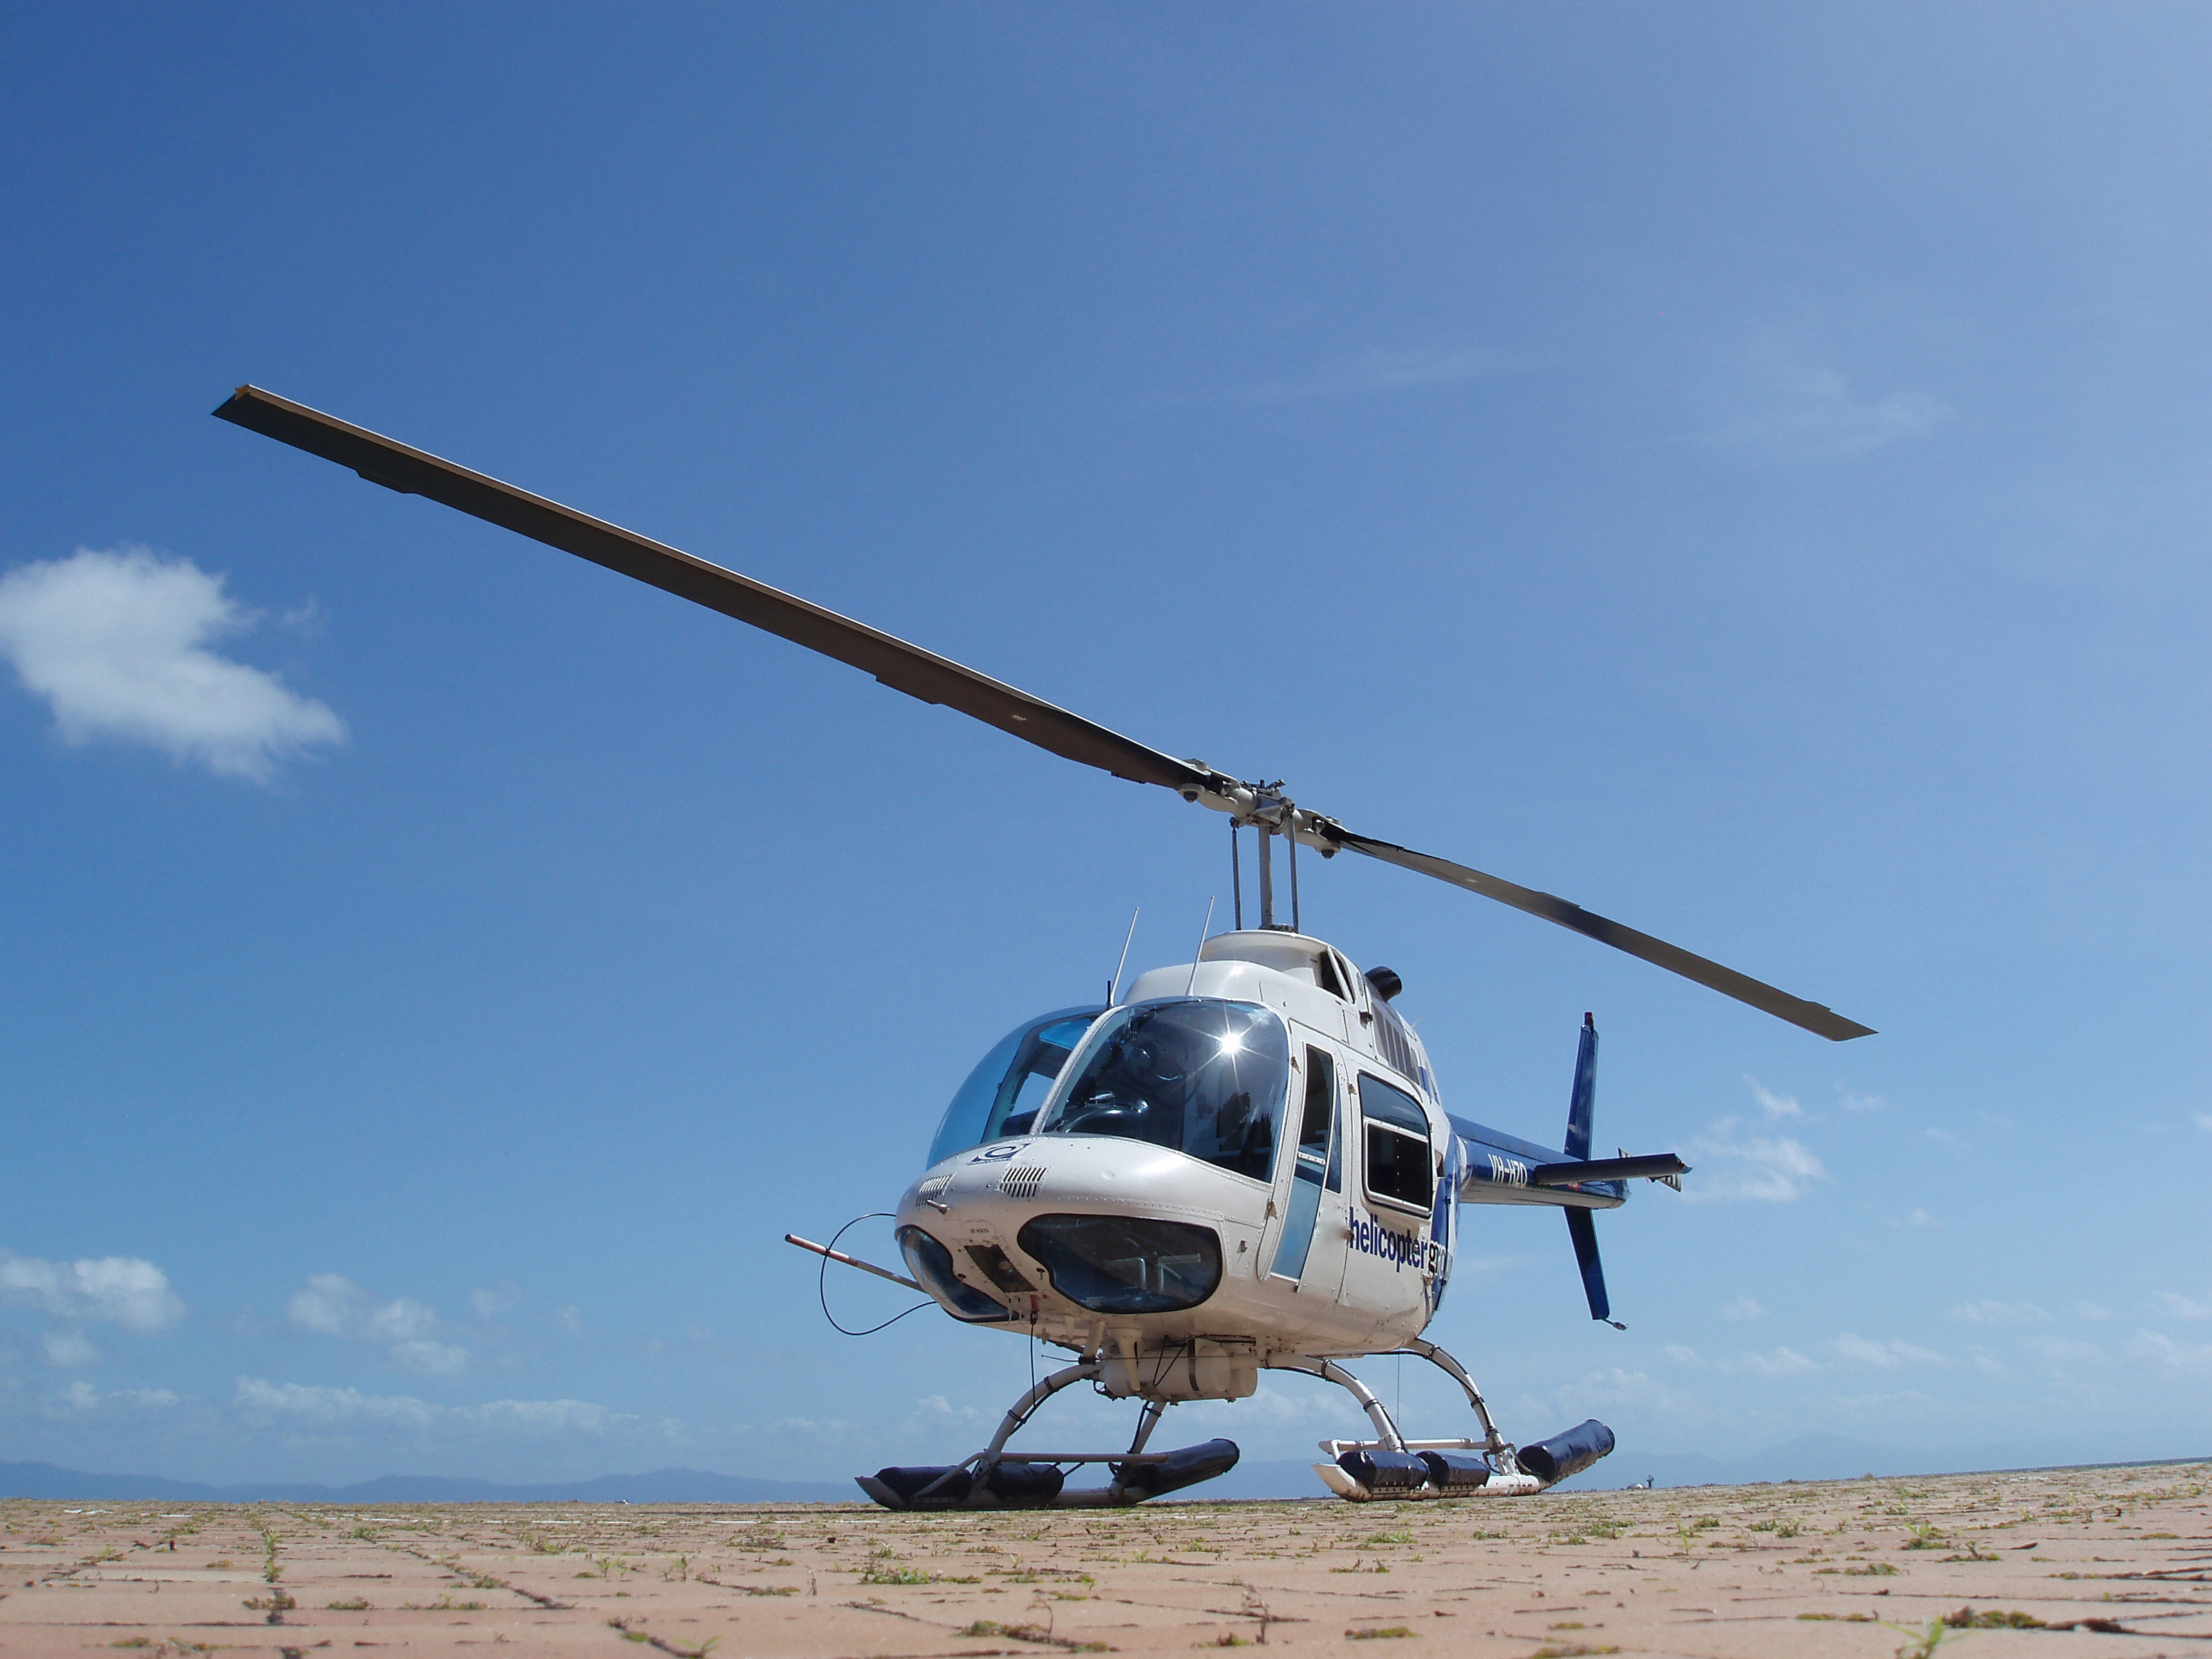 Free Stock Photo 11123 Helicopter parked on a helipad | freeimageslive